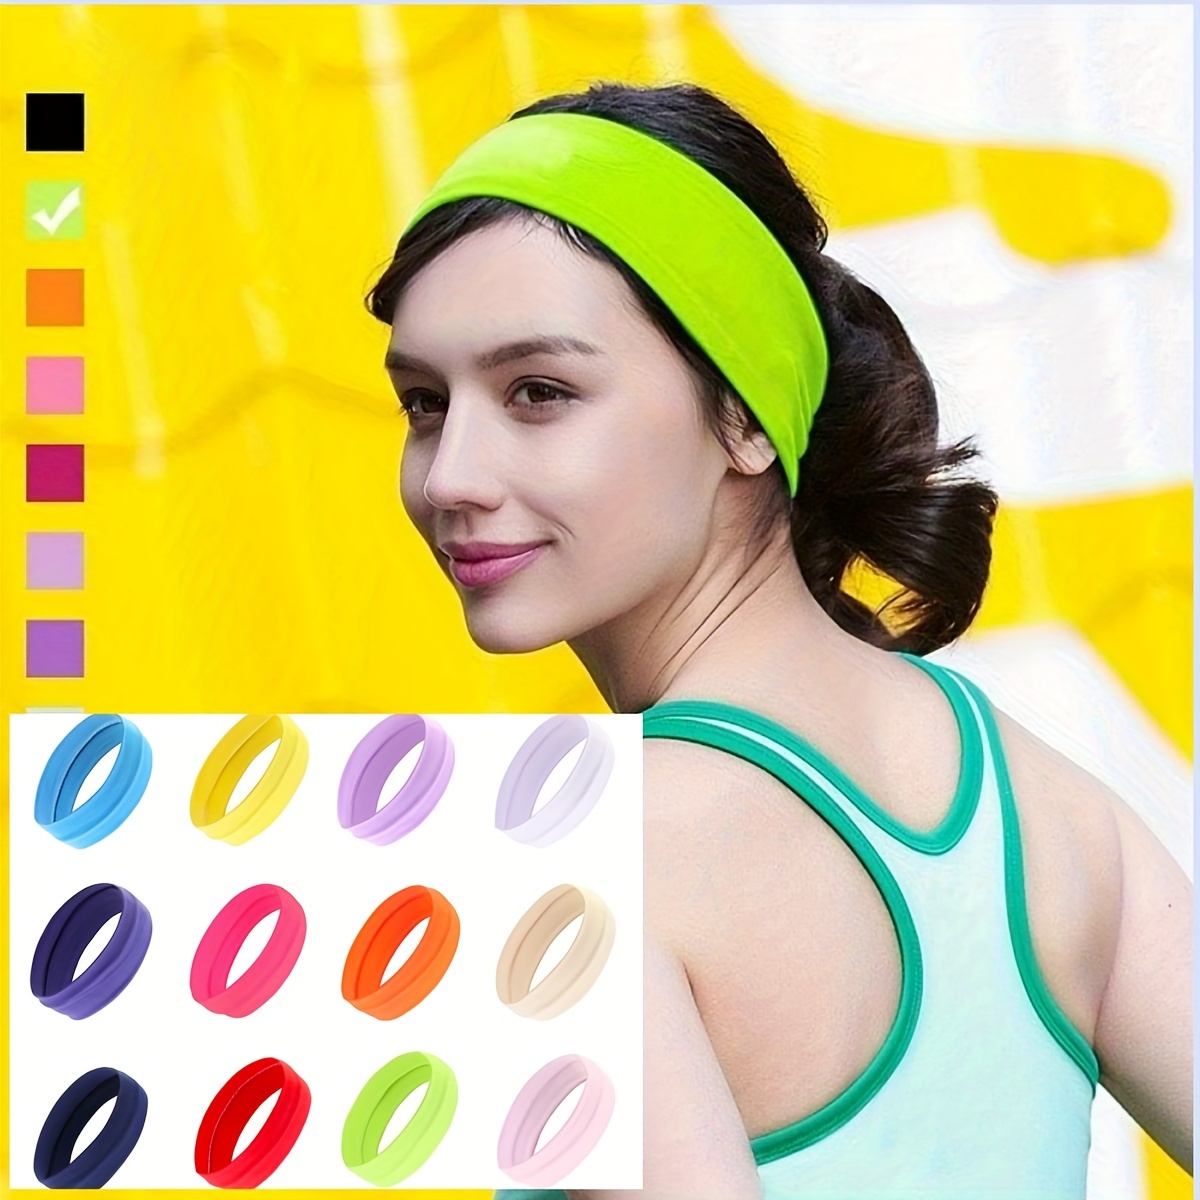 

10-pack Elastic Sports Headbands For Women, Stretchy Non-slip Candy-colored Hairbands, Comfortable Fashionable Sweatbands For Fitness Yoga Running Cycling